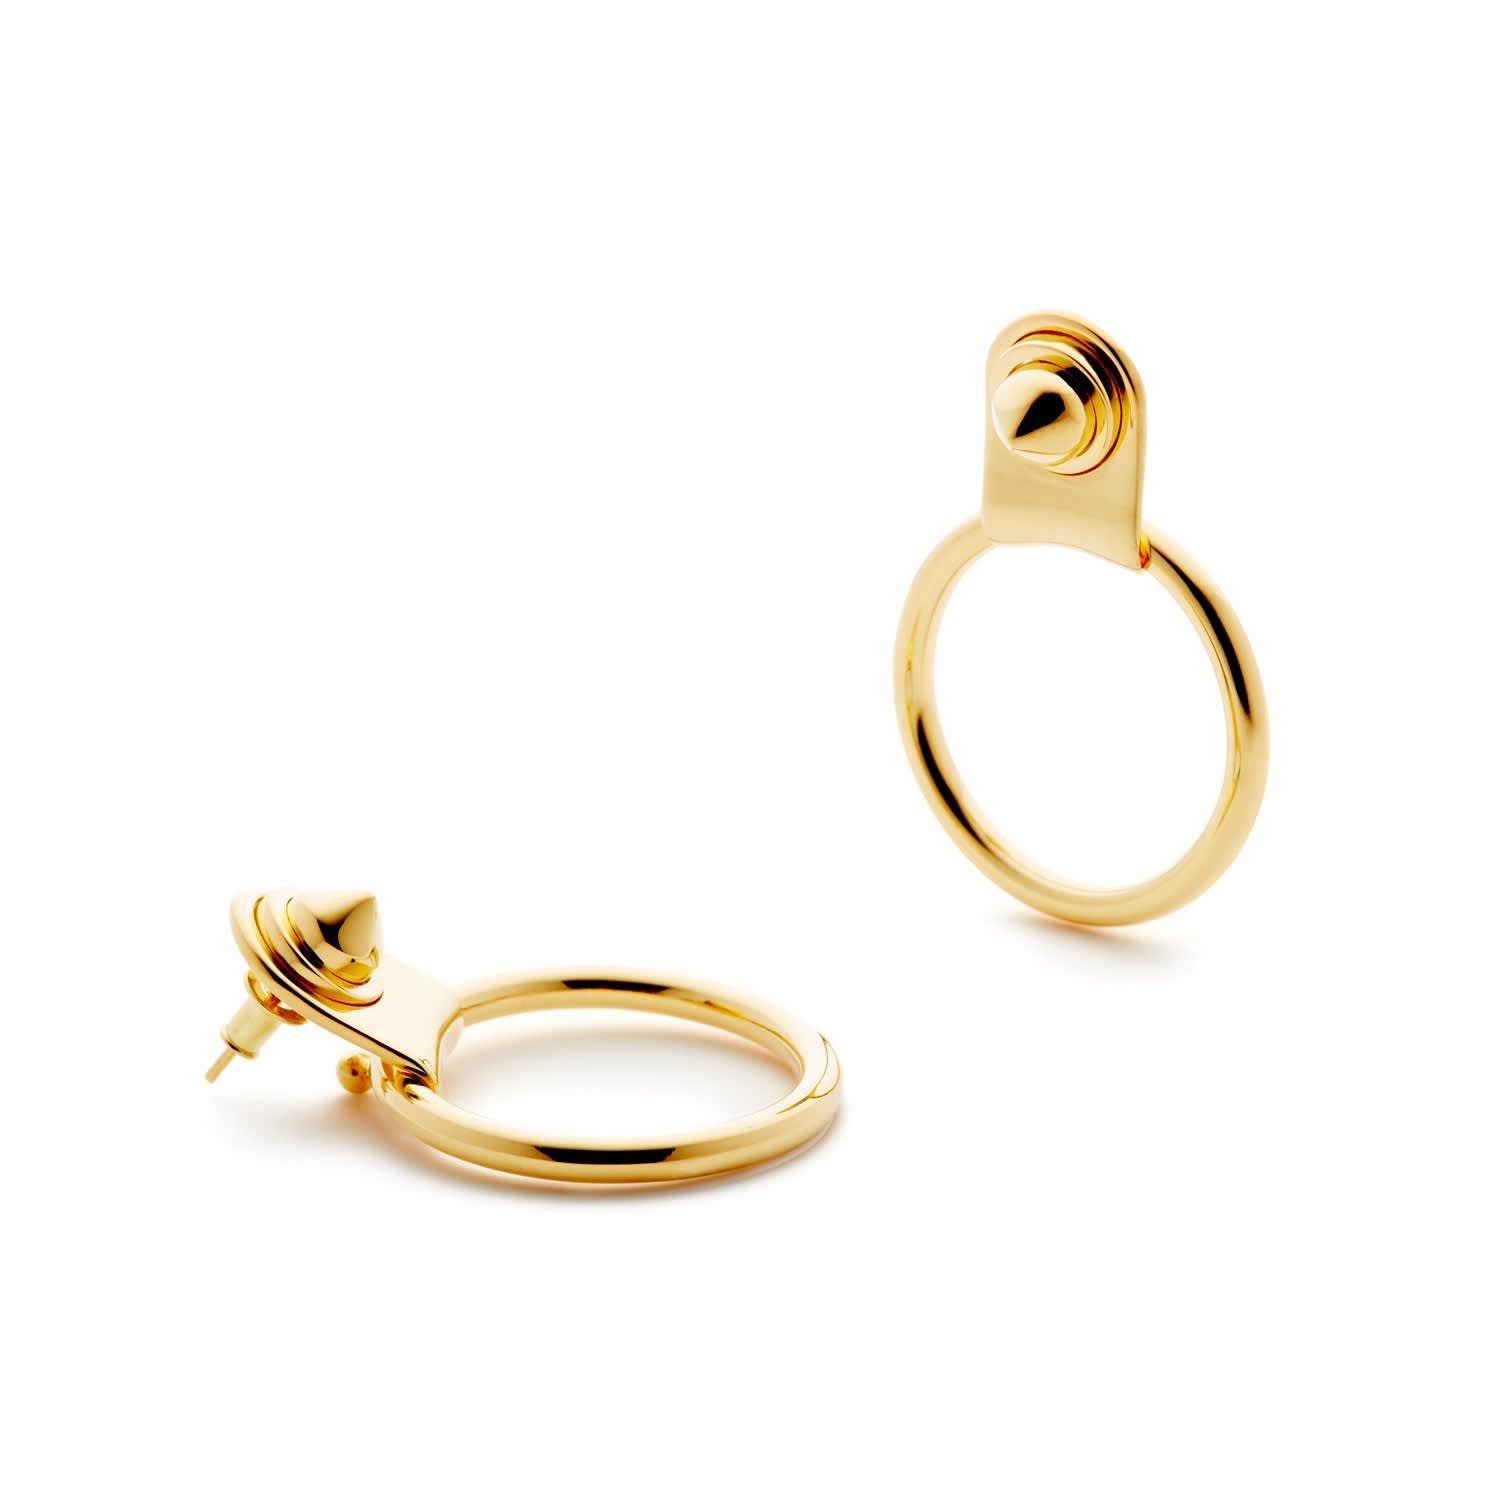 Hoops 2.0 In Gold Vermeil by Motley London | Wolf and Badger (Global excl. US)